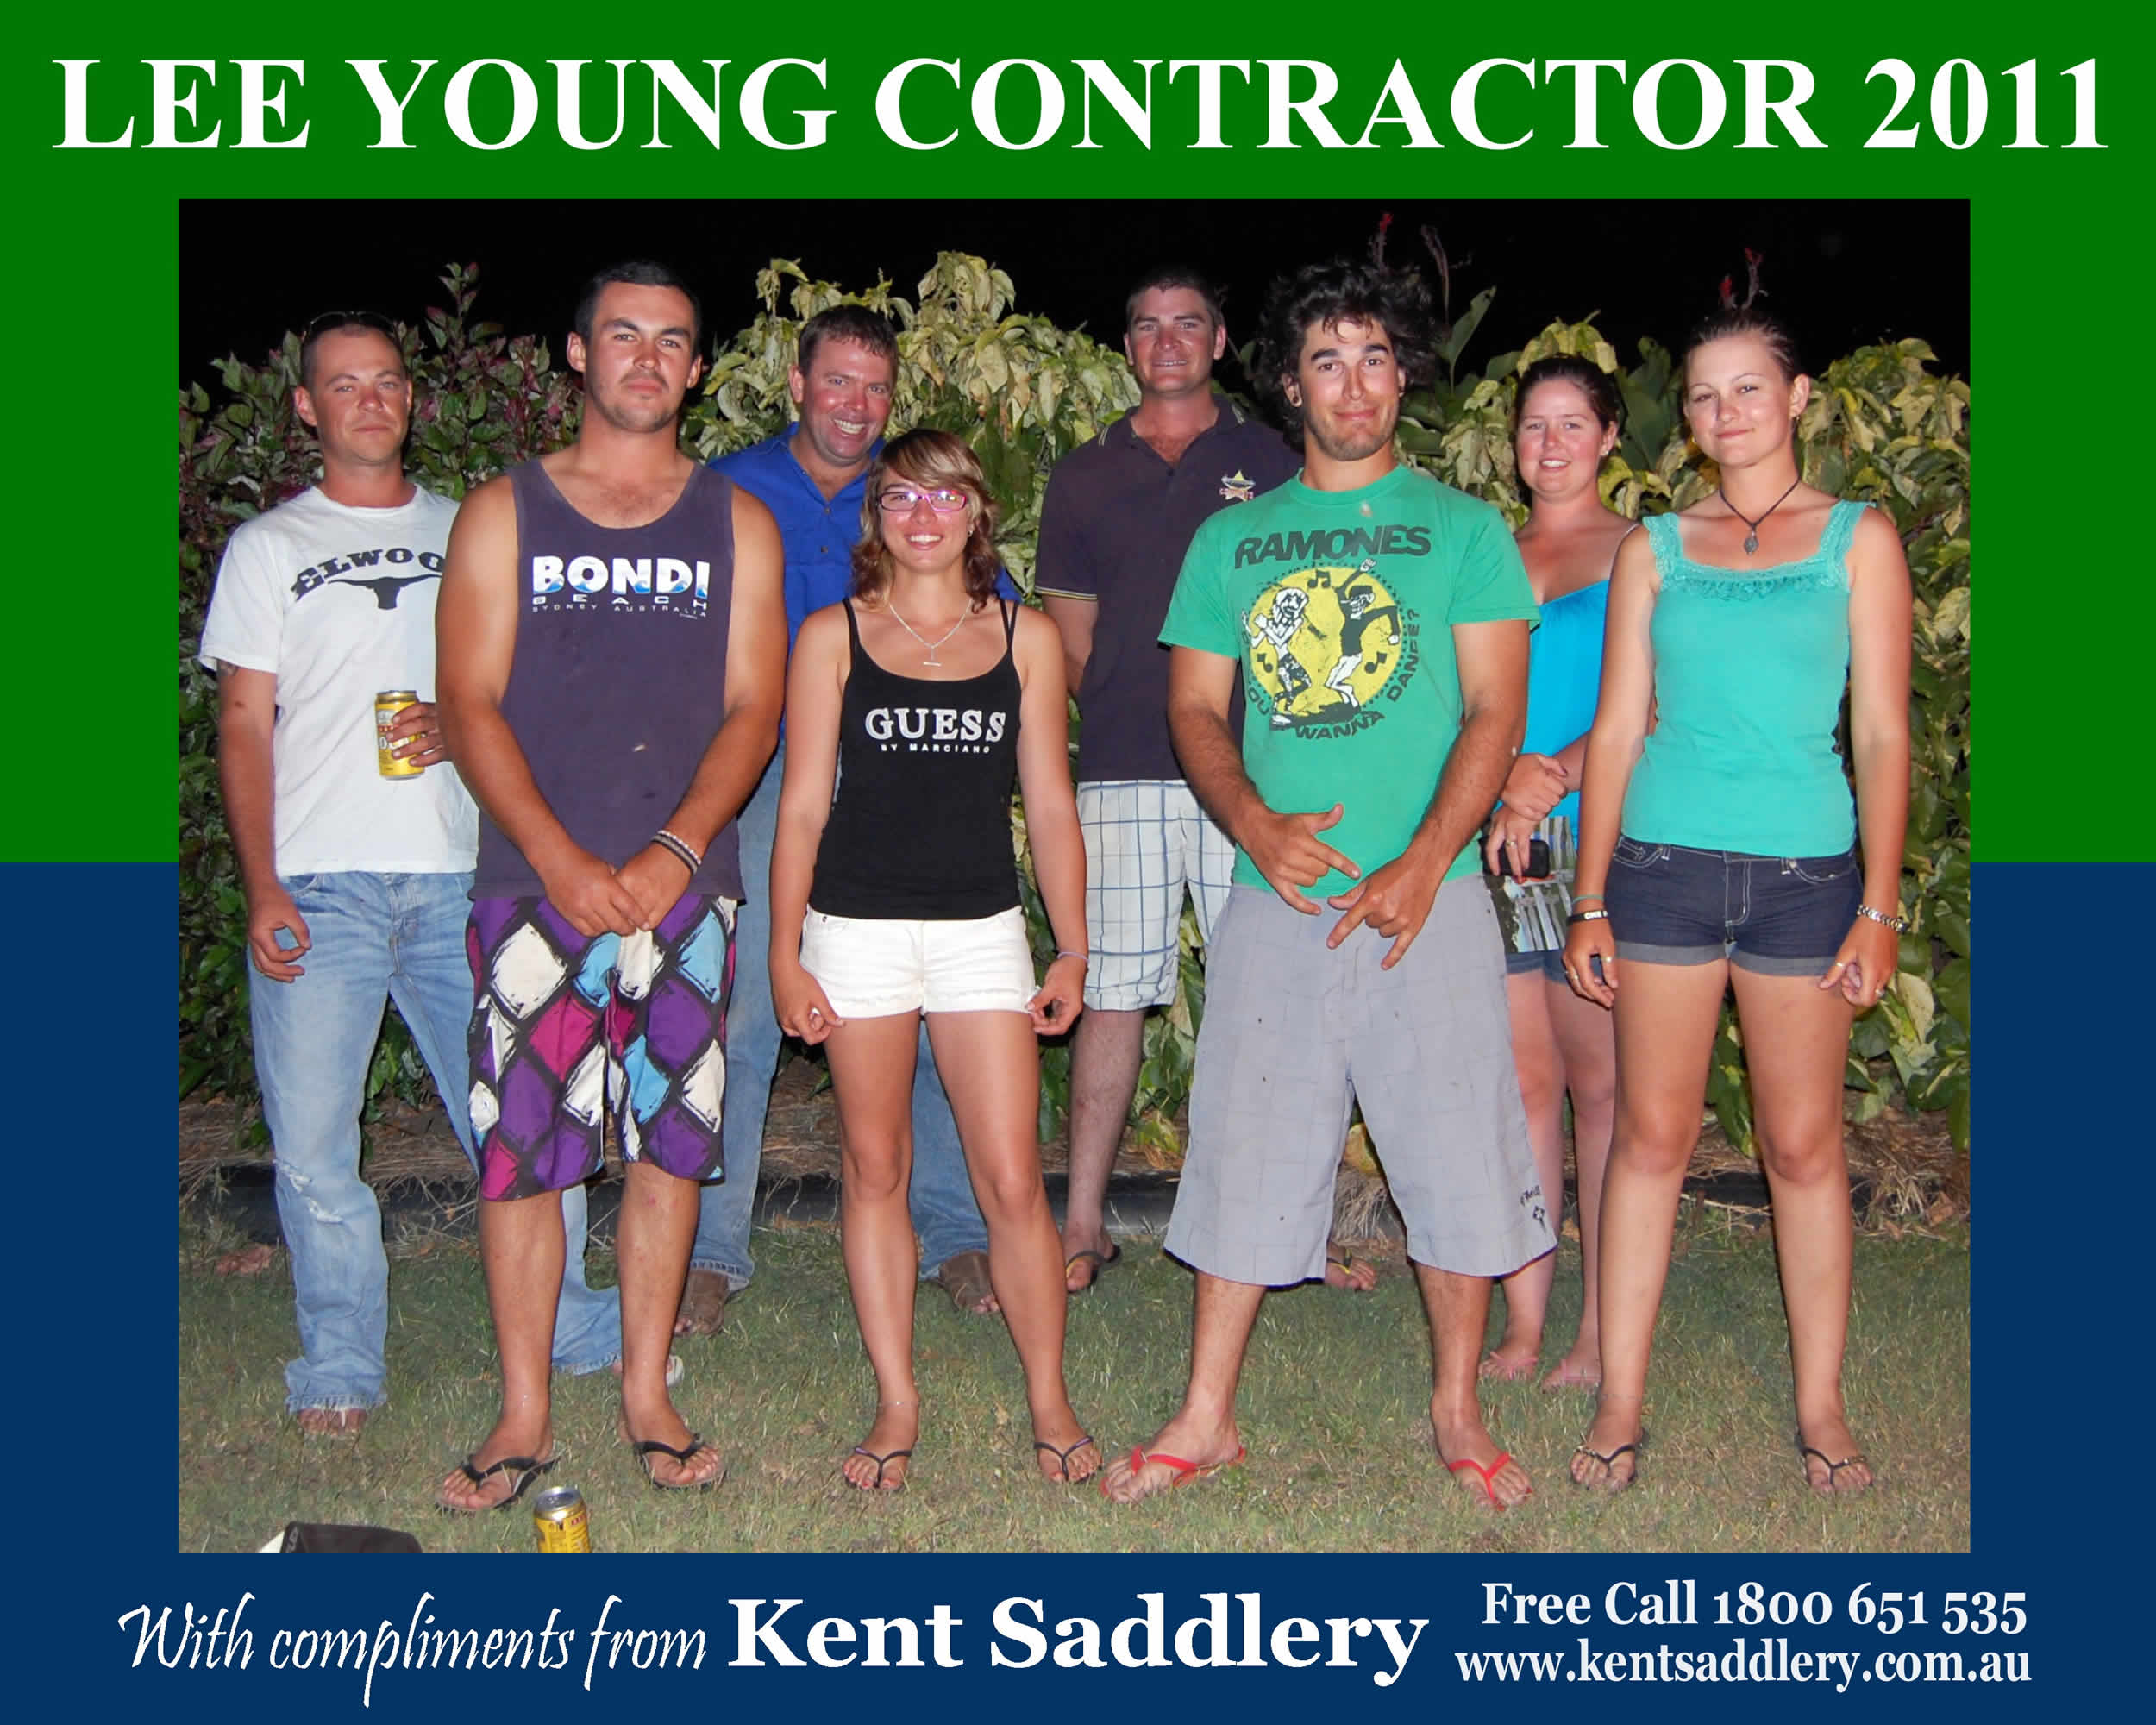 Drovers & Contractors - Lee Young Contractor 6